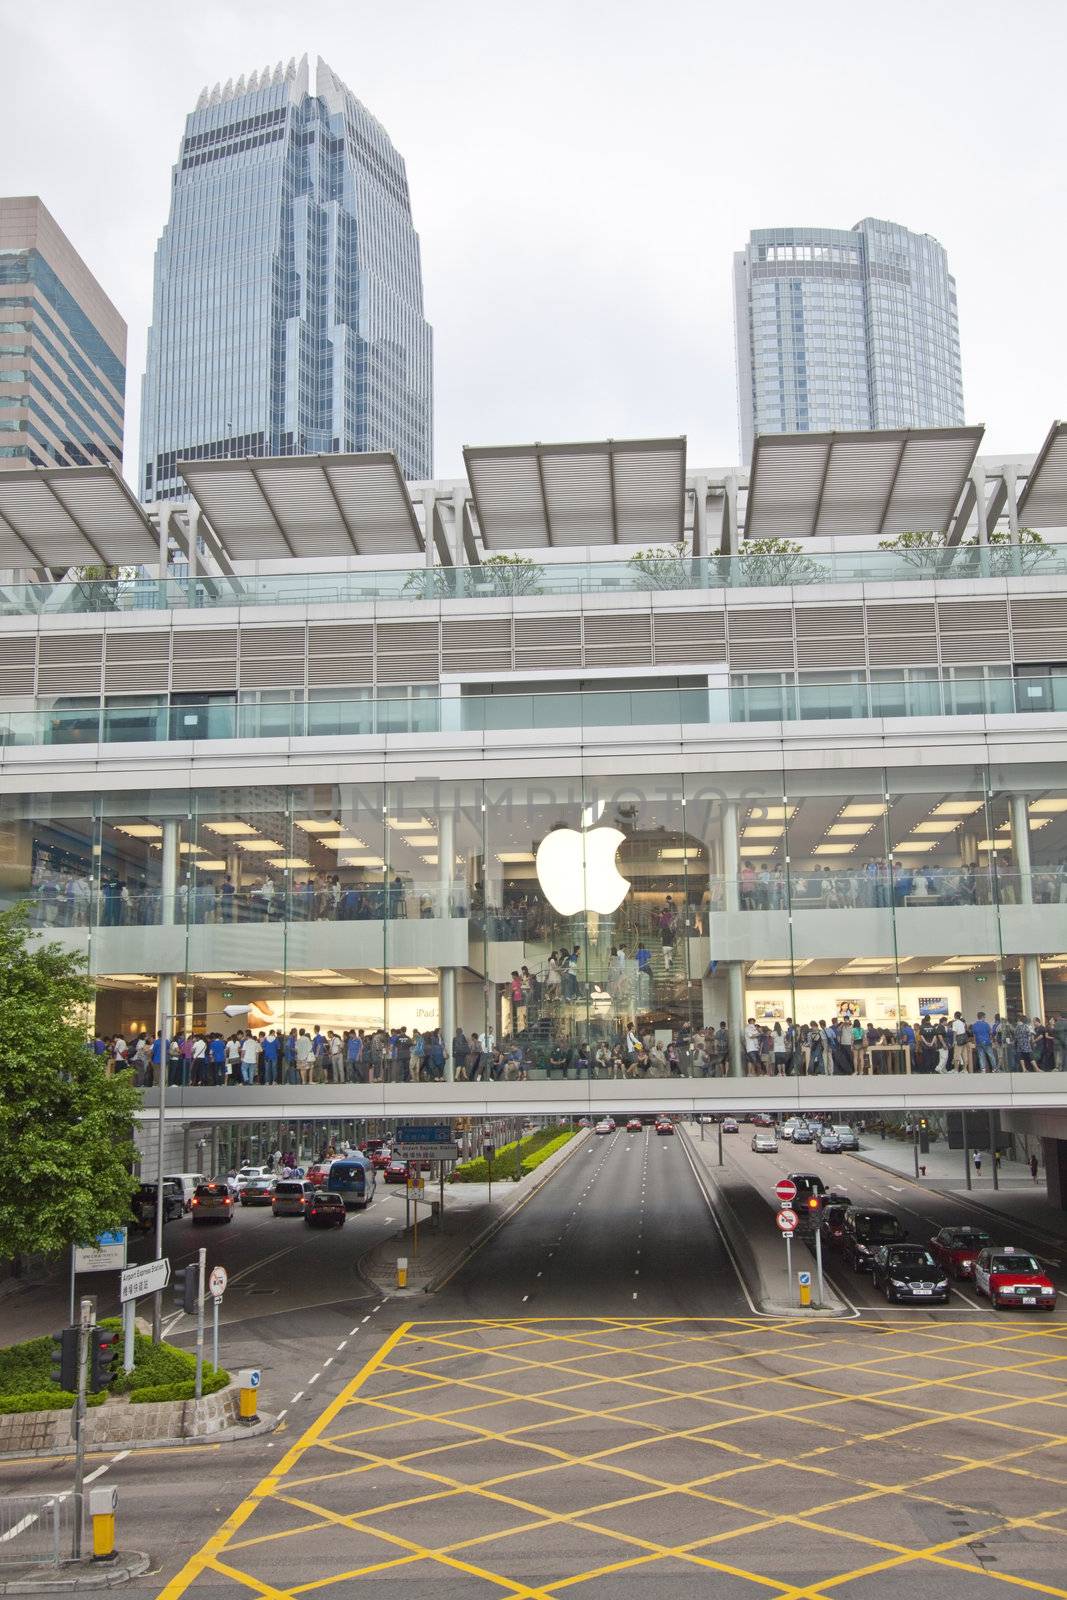 HONG KONG - SEPT 25, Apple Inc. opened its long-awaited first store in Hong Kong on 25 Sepetember, 2011. The store is located on two floors linked by a glass spiral staircase in Hong Kong Central district.